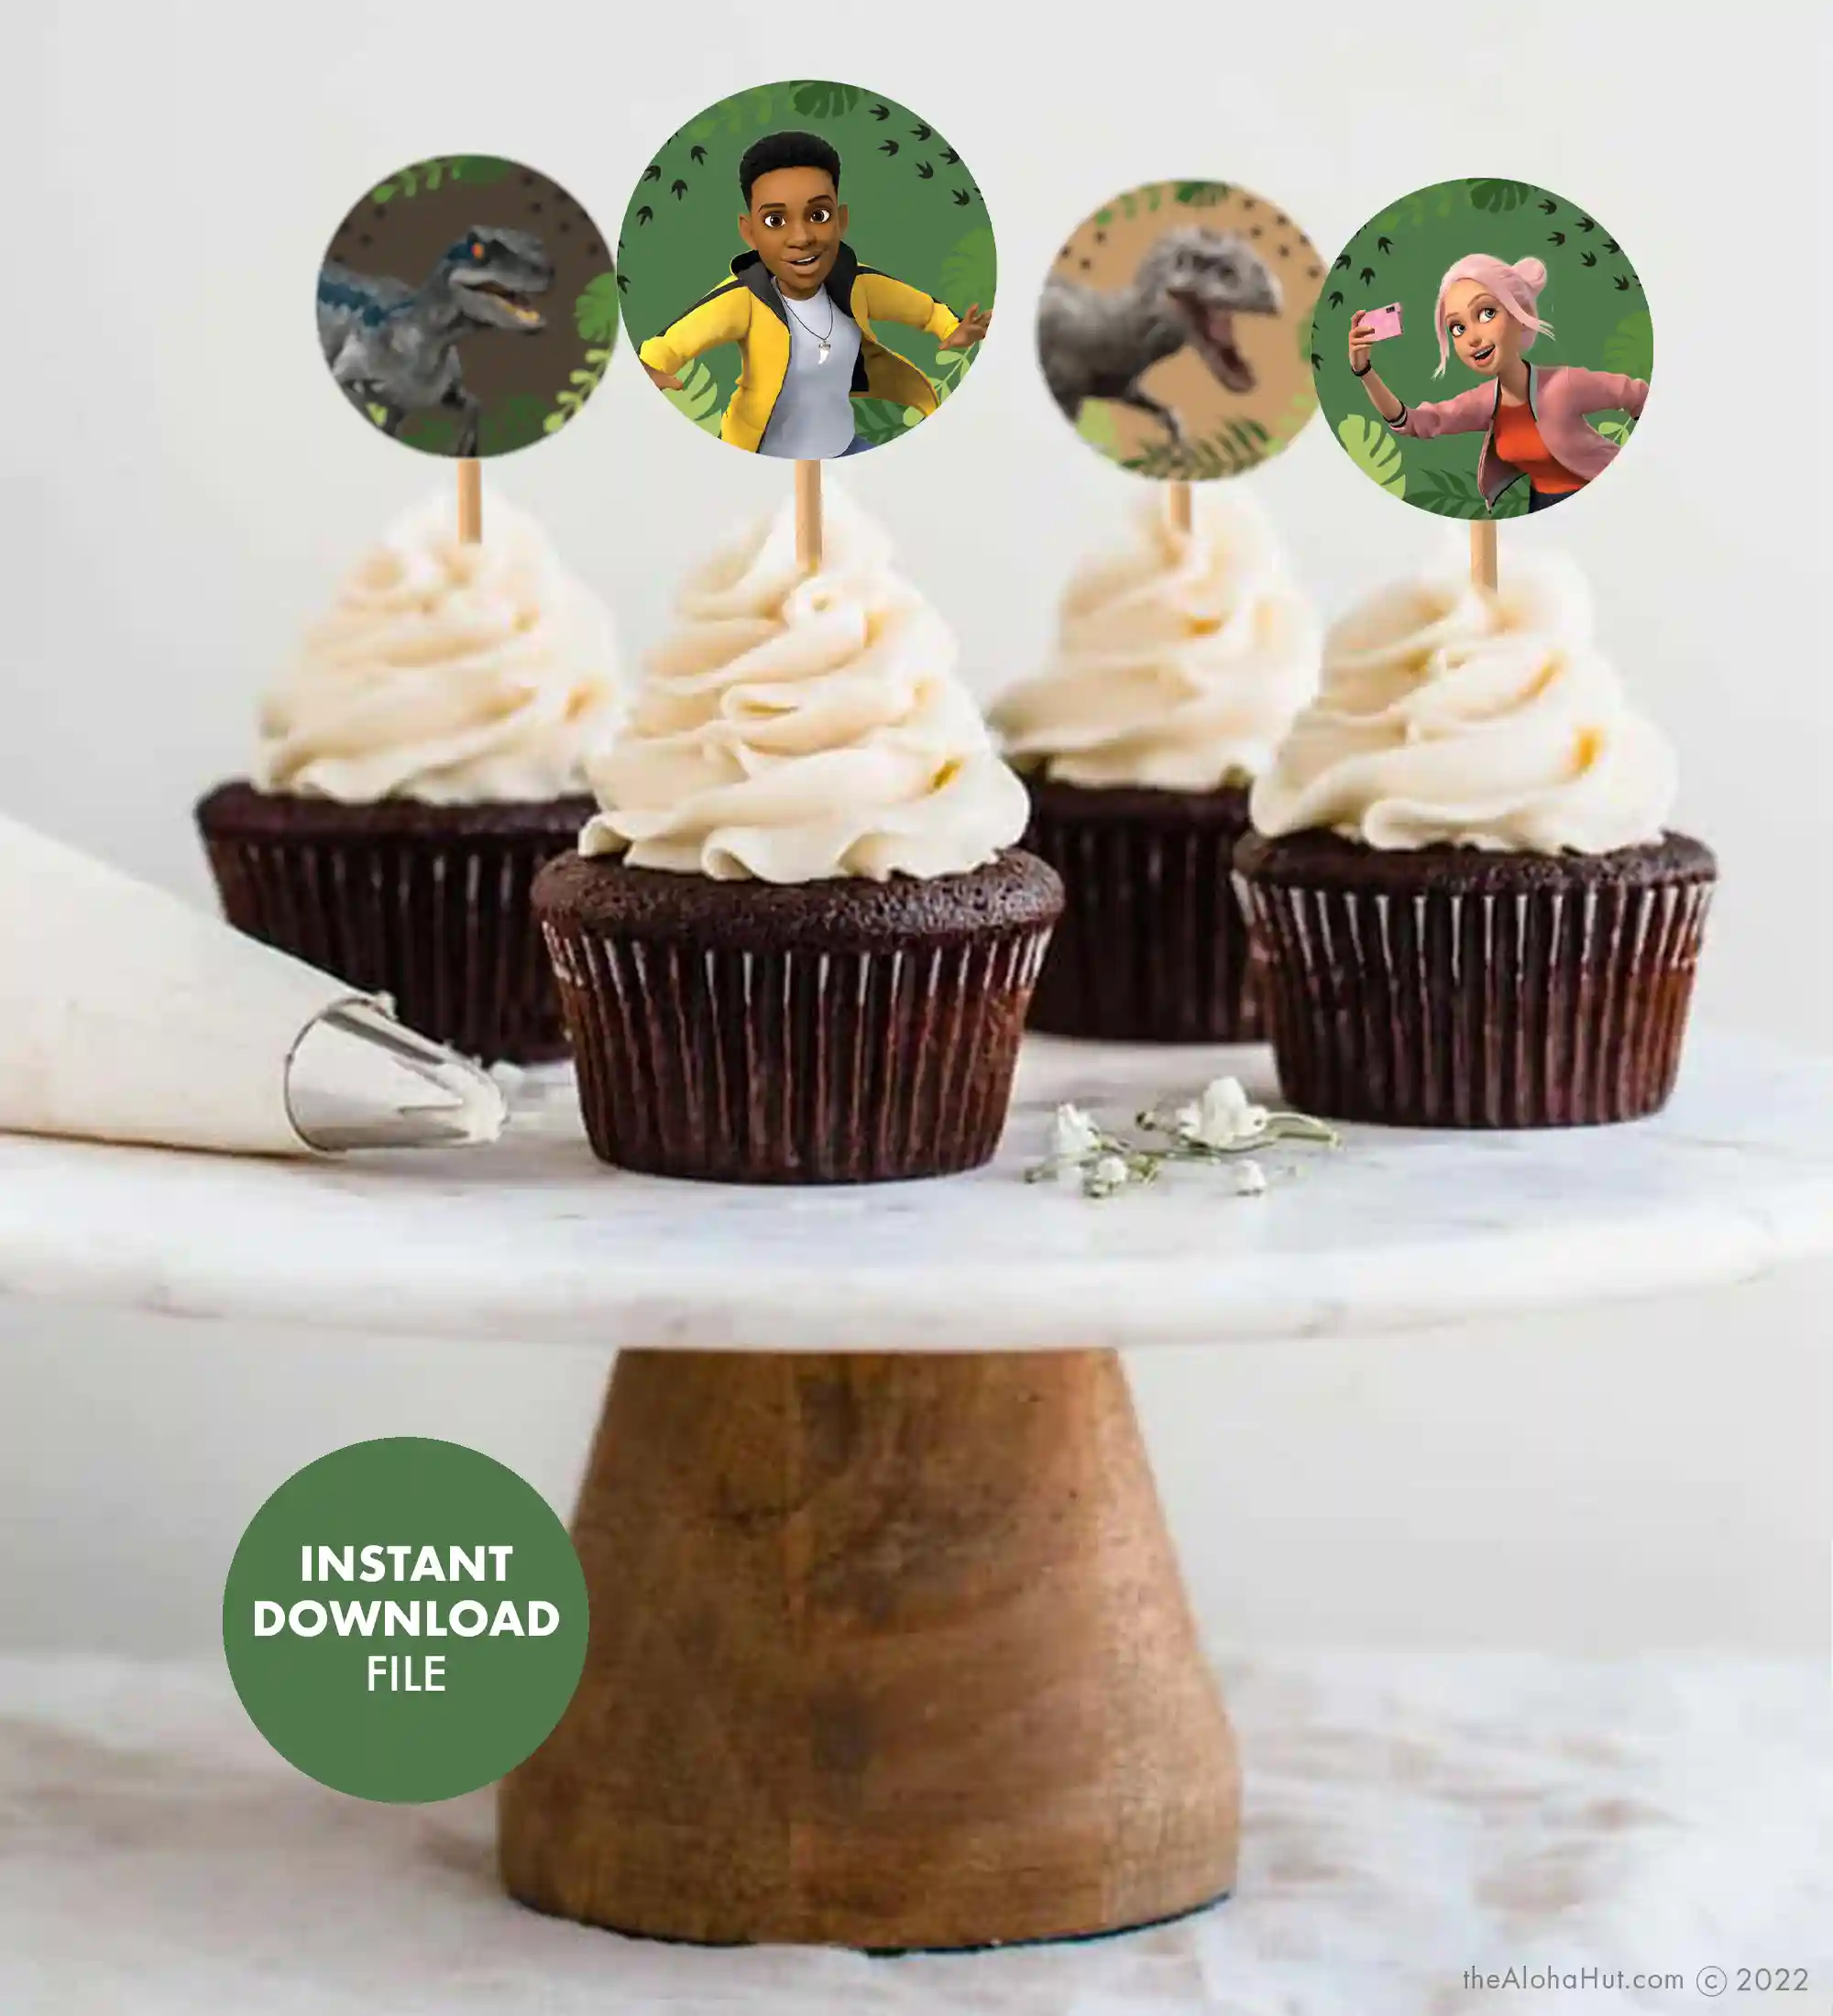 Jurassic World Camp Cretaceous Party Ideas - Dinosaur Party Ideas - free printable party decor & games - cupcake toppers